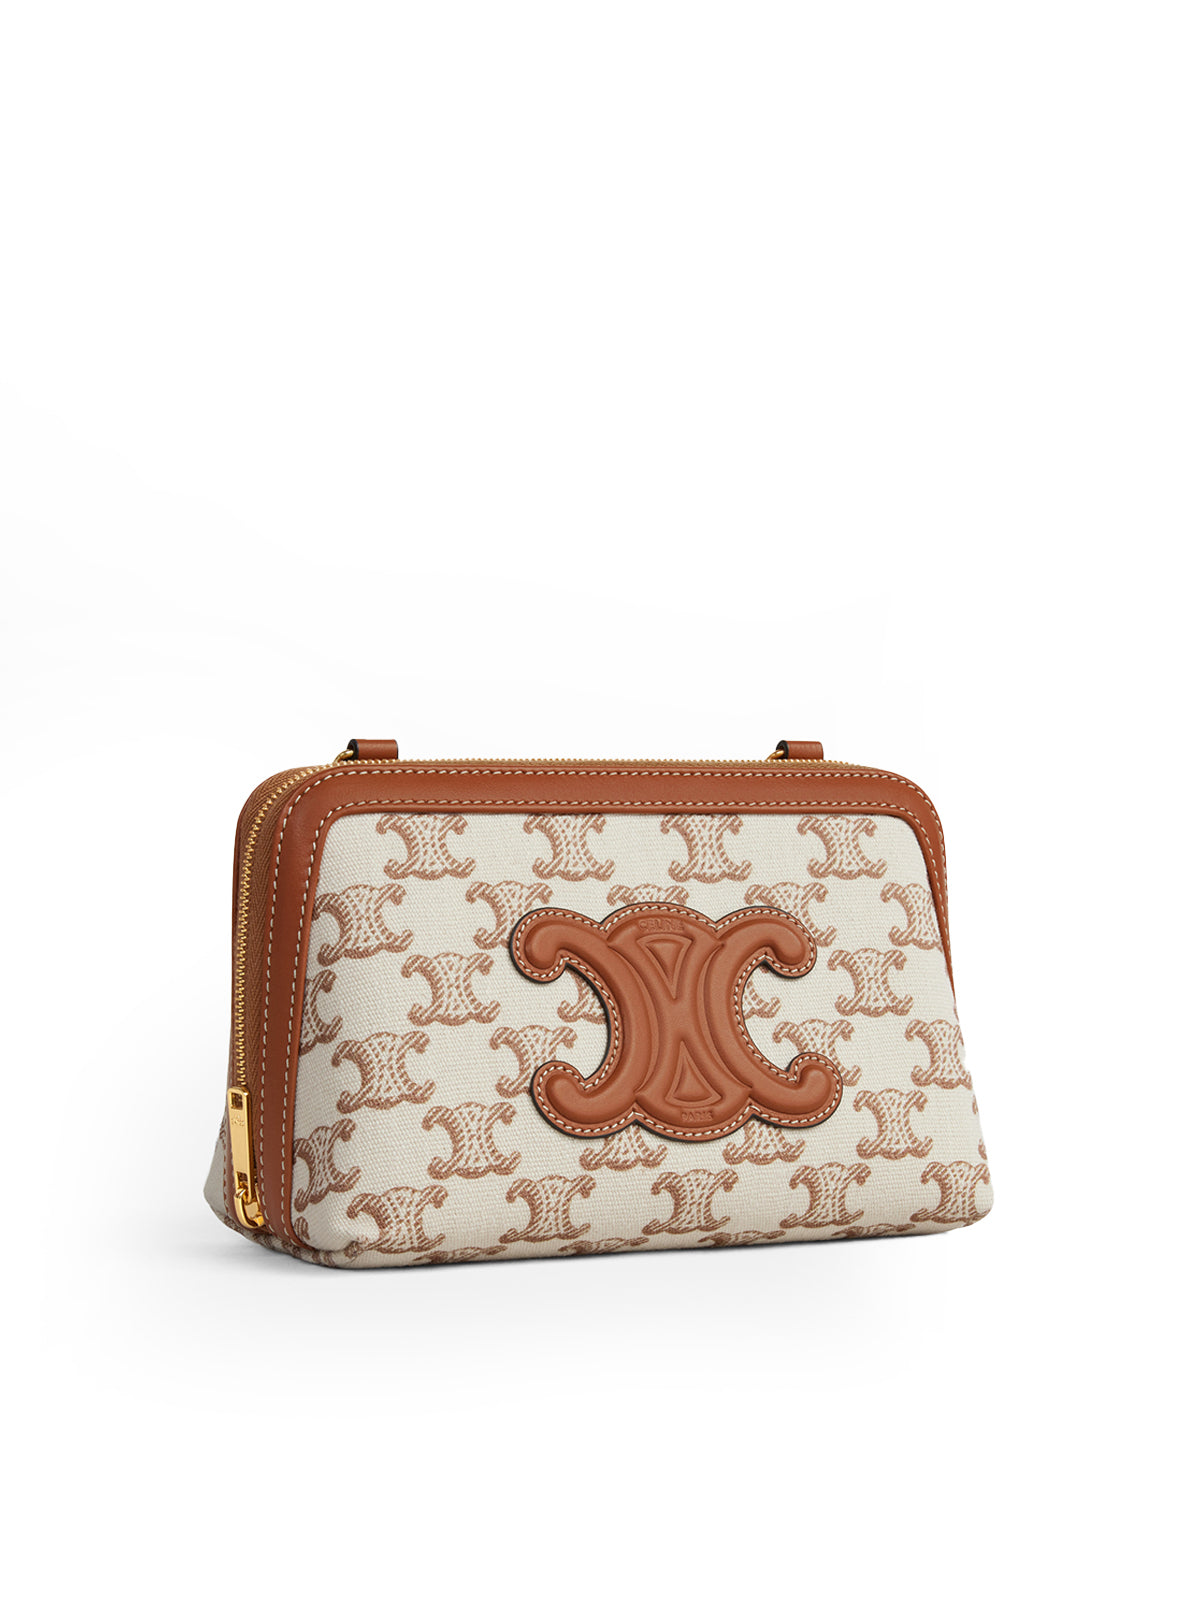 TRIOMPHE CUIR CLUTCH WITH CHAIN IN TRIOMPHE PRINT FABRIC AND WHITE CALF LEATHER